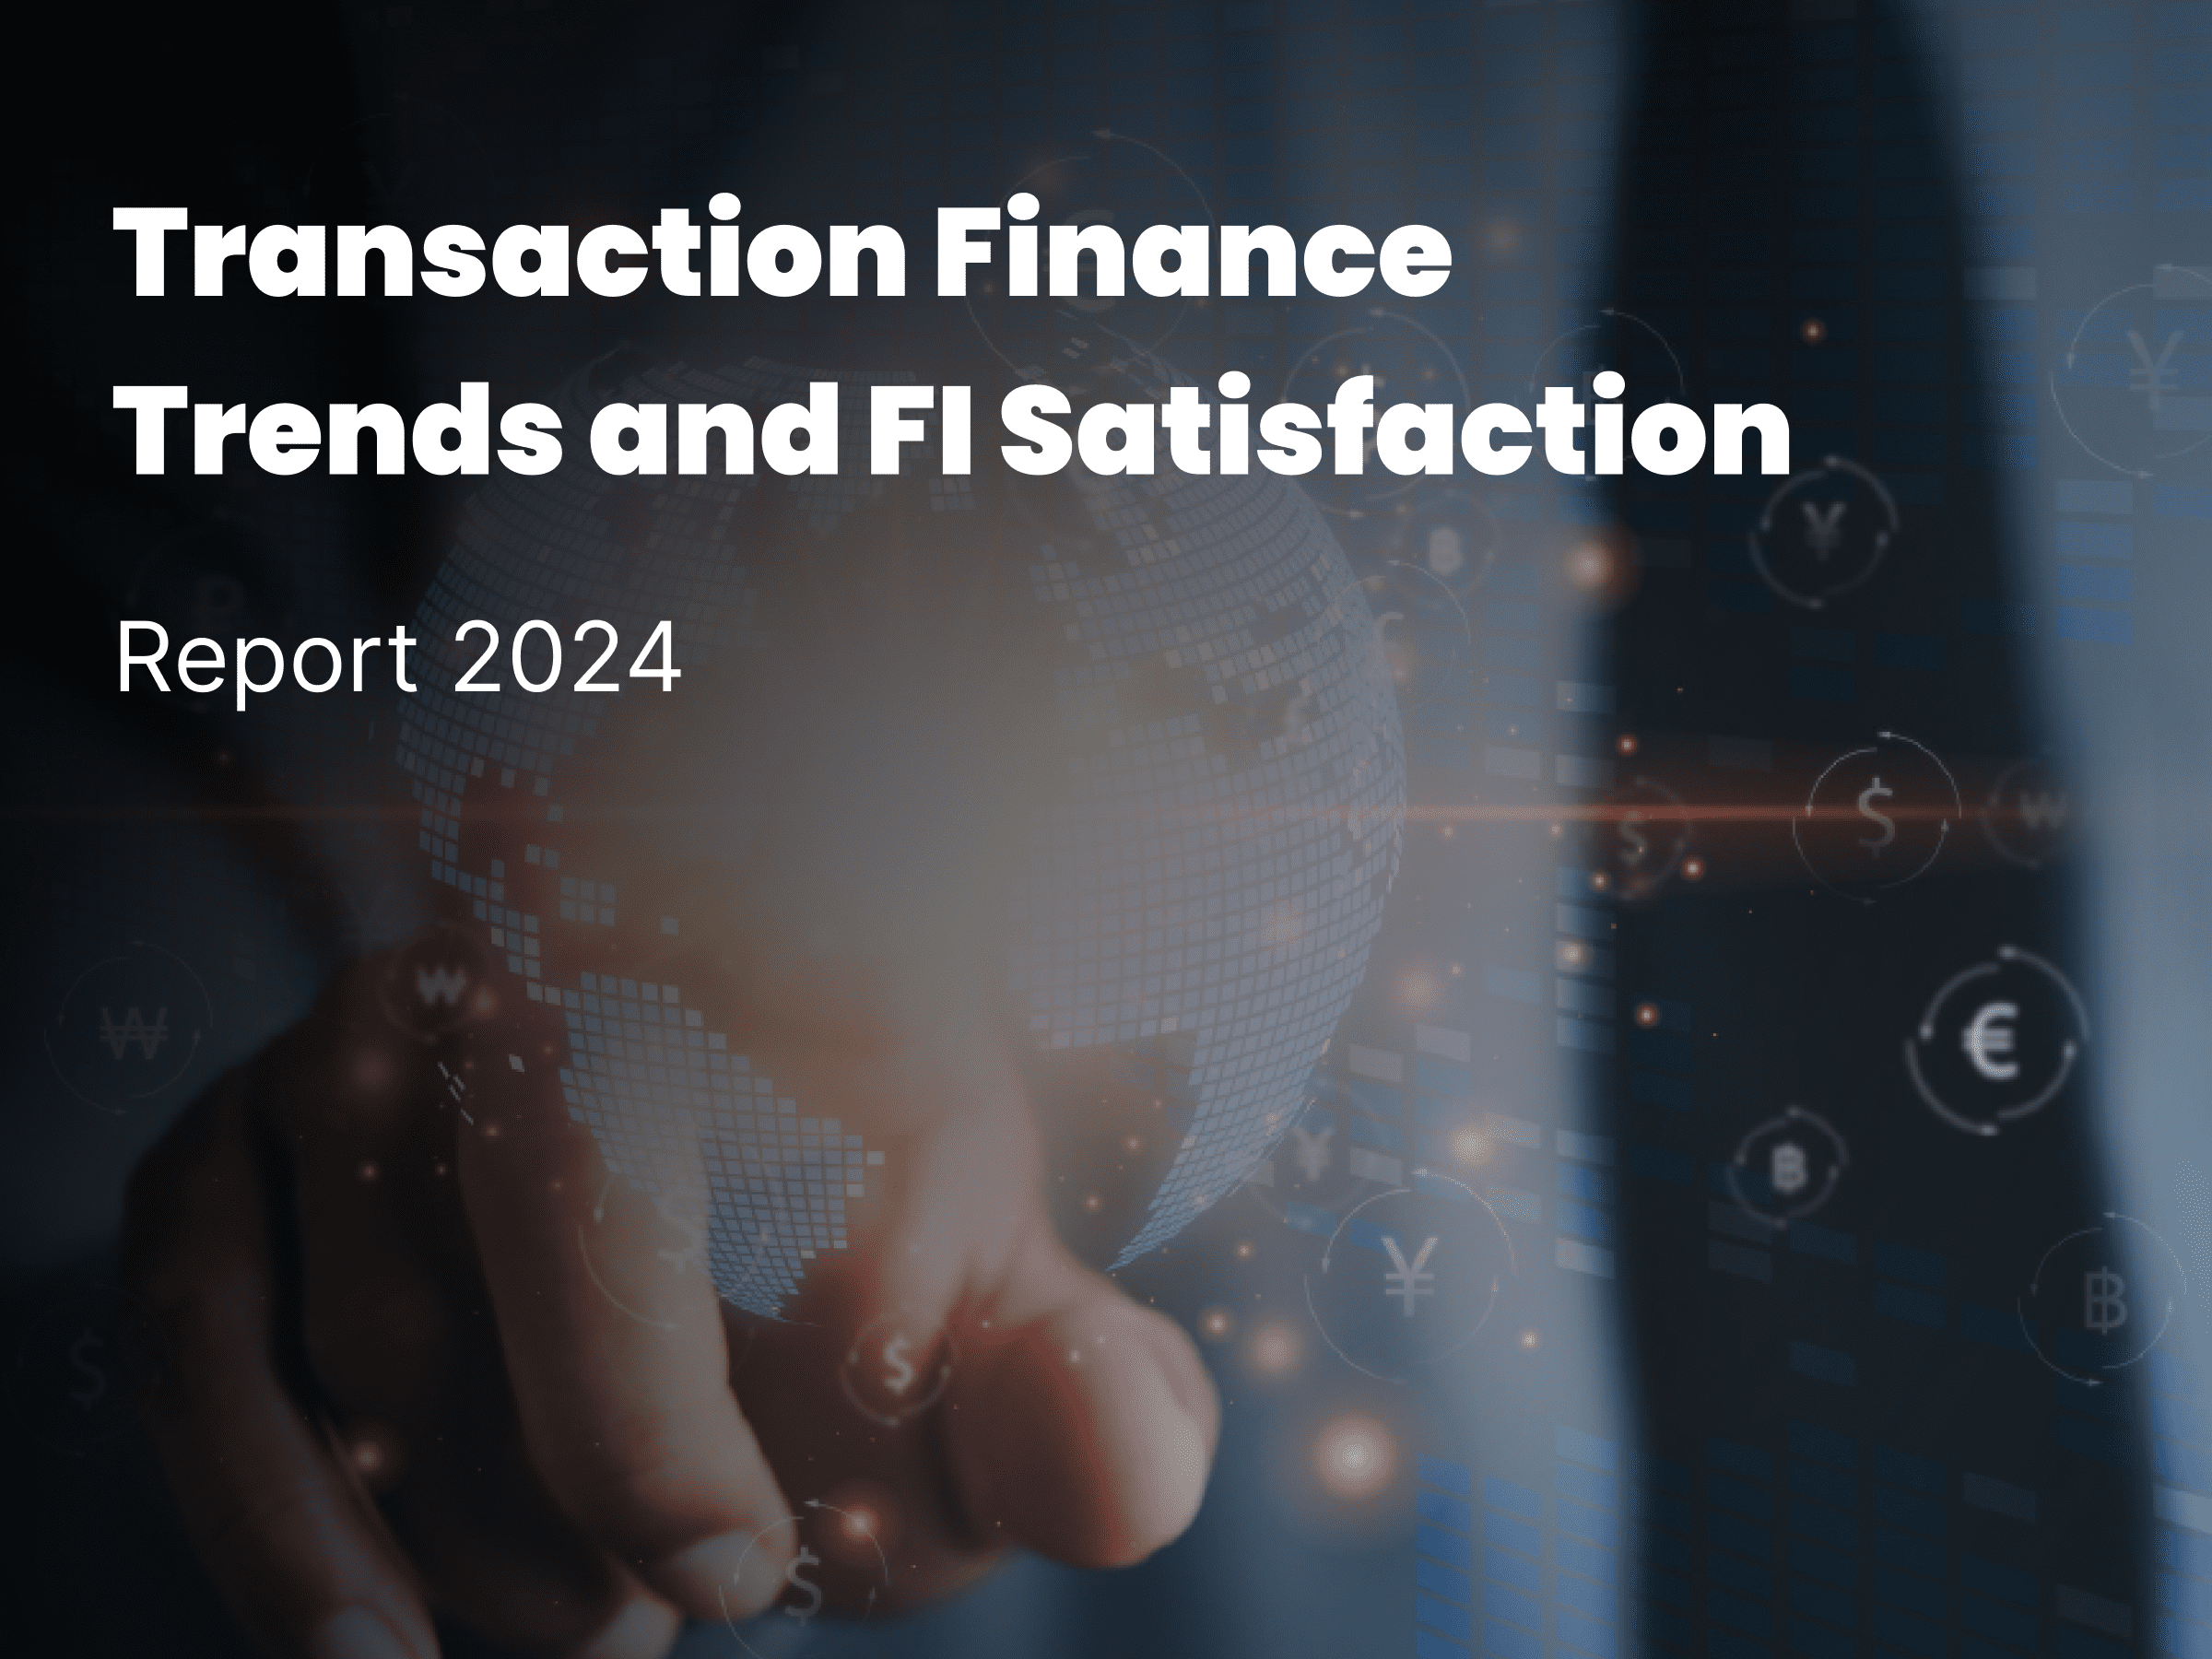 Asia Pacific Transaction Finance Trends and Financial Institution Satisfaction Report